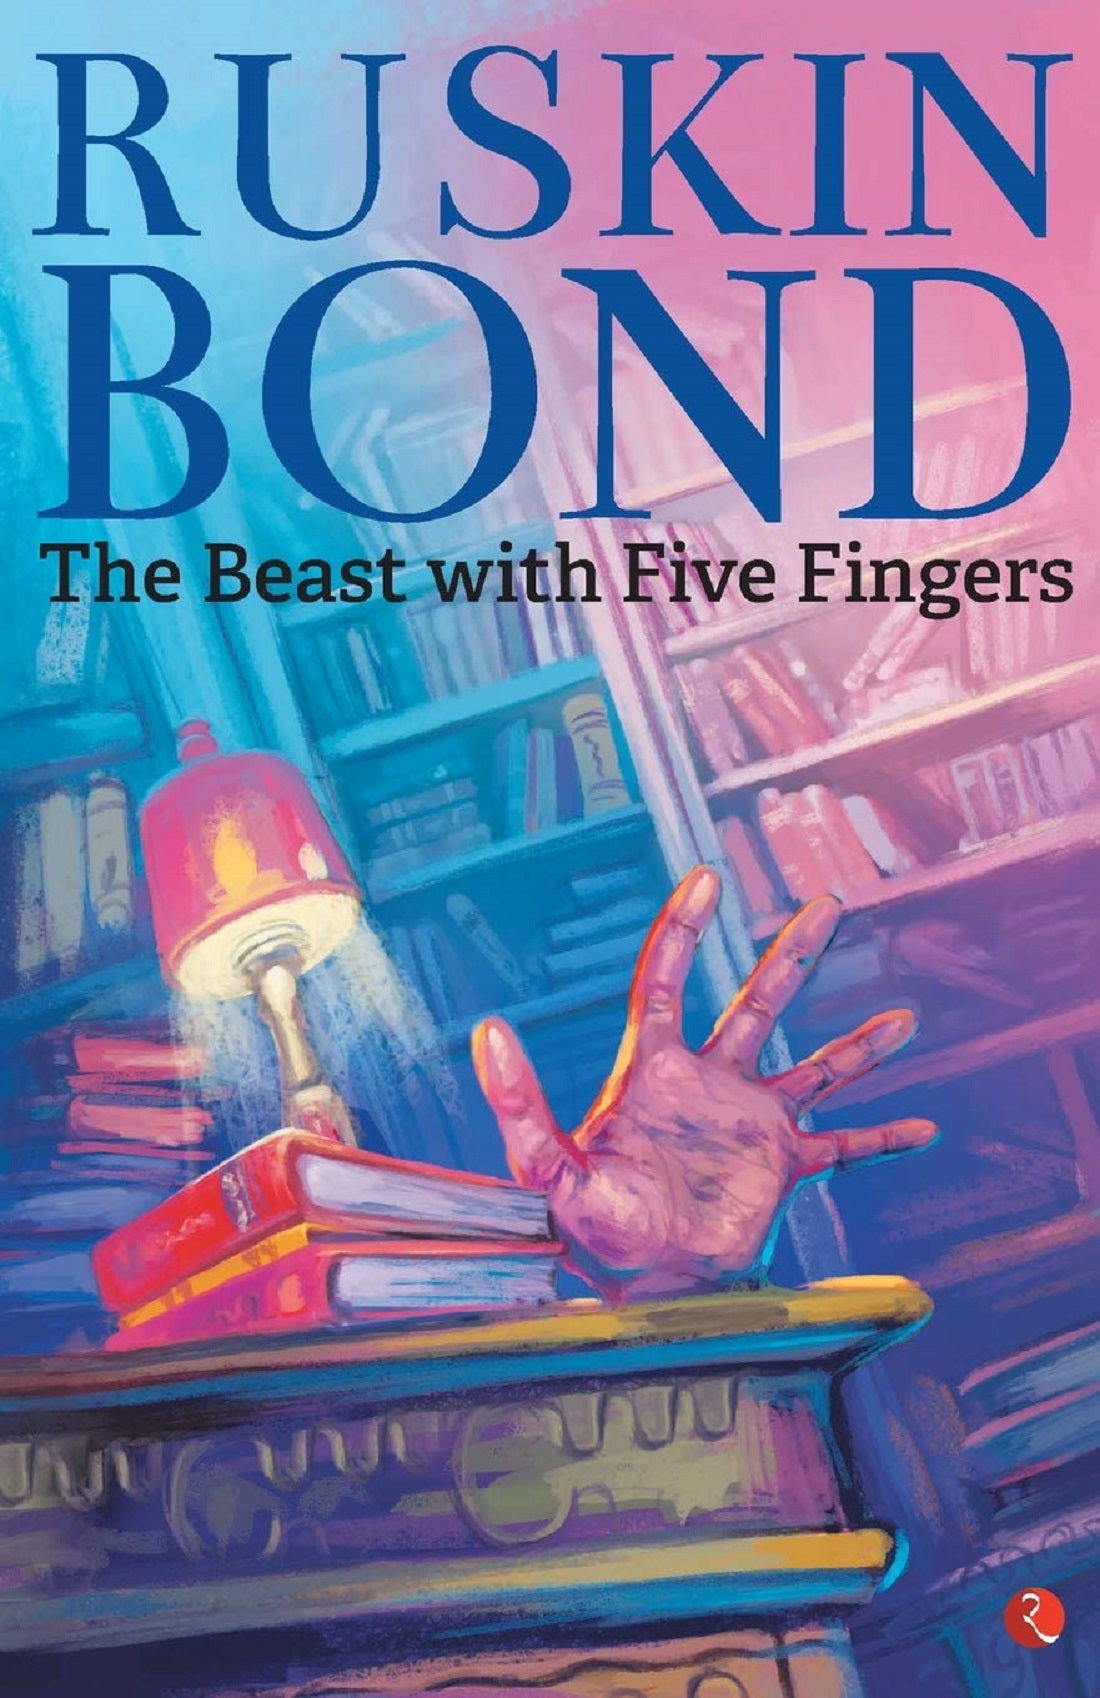 THE BEAST WITH FIVE FINGERS